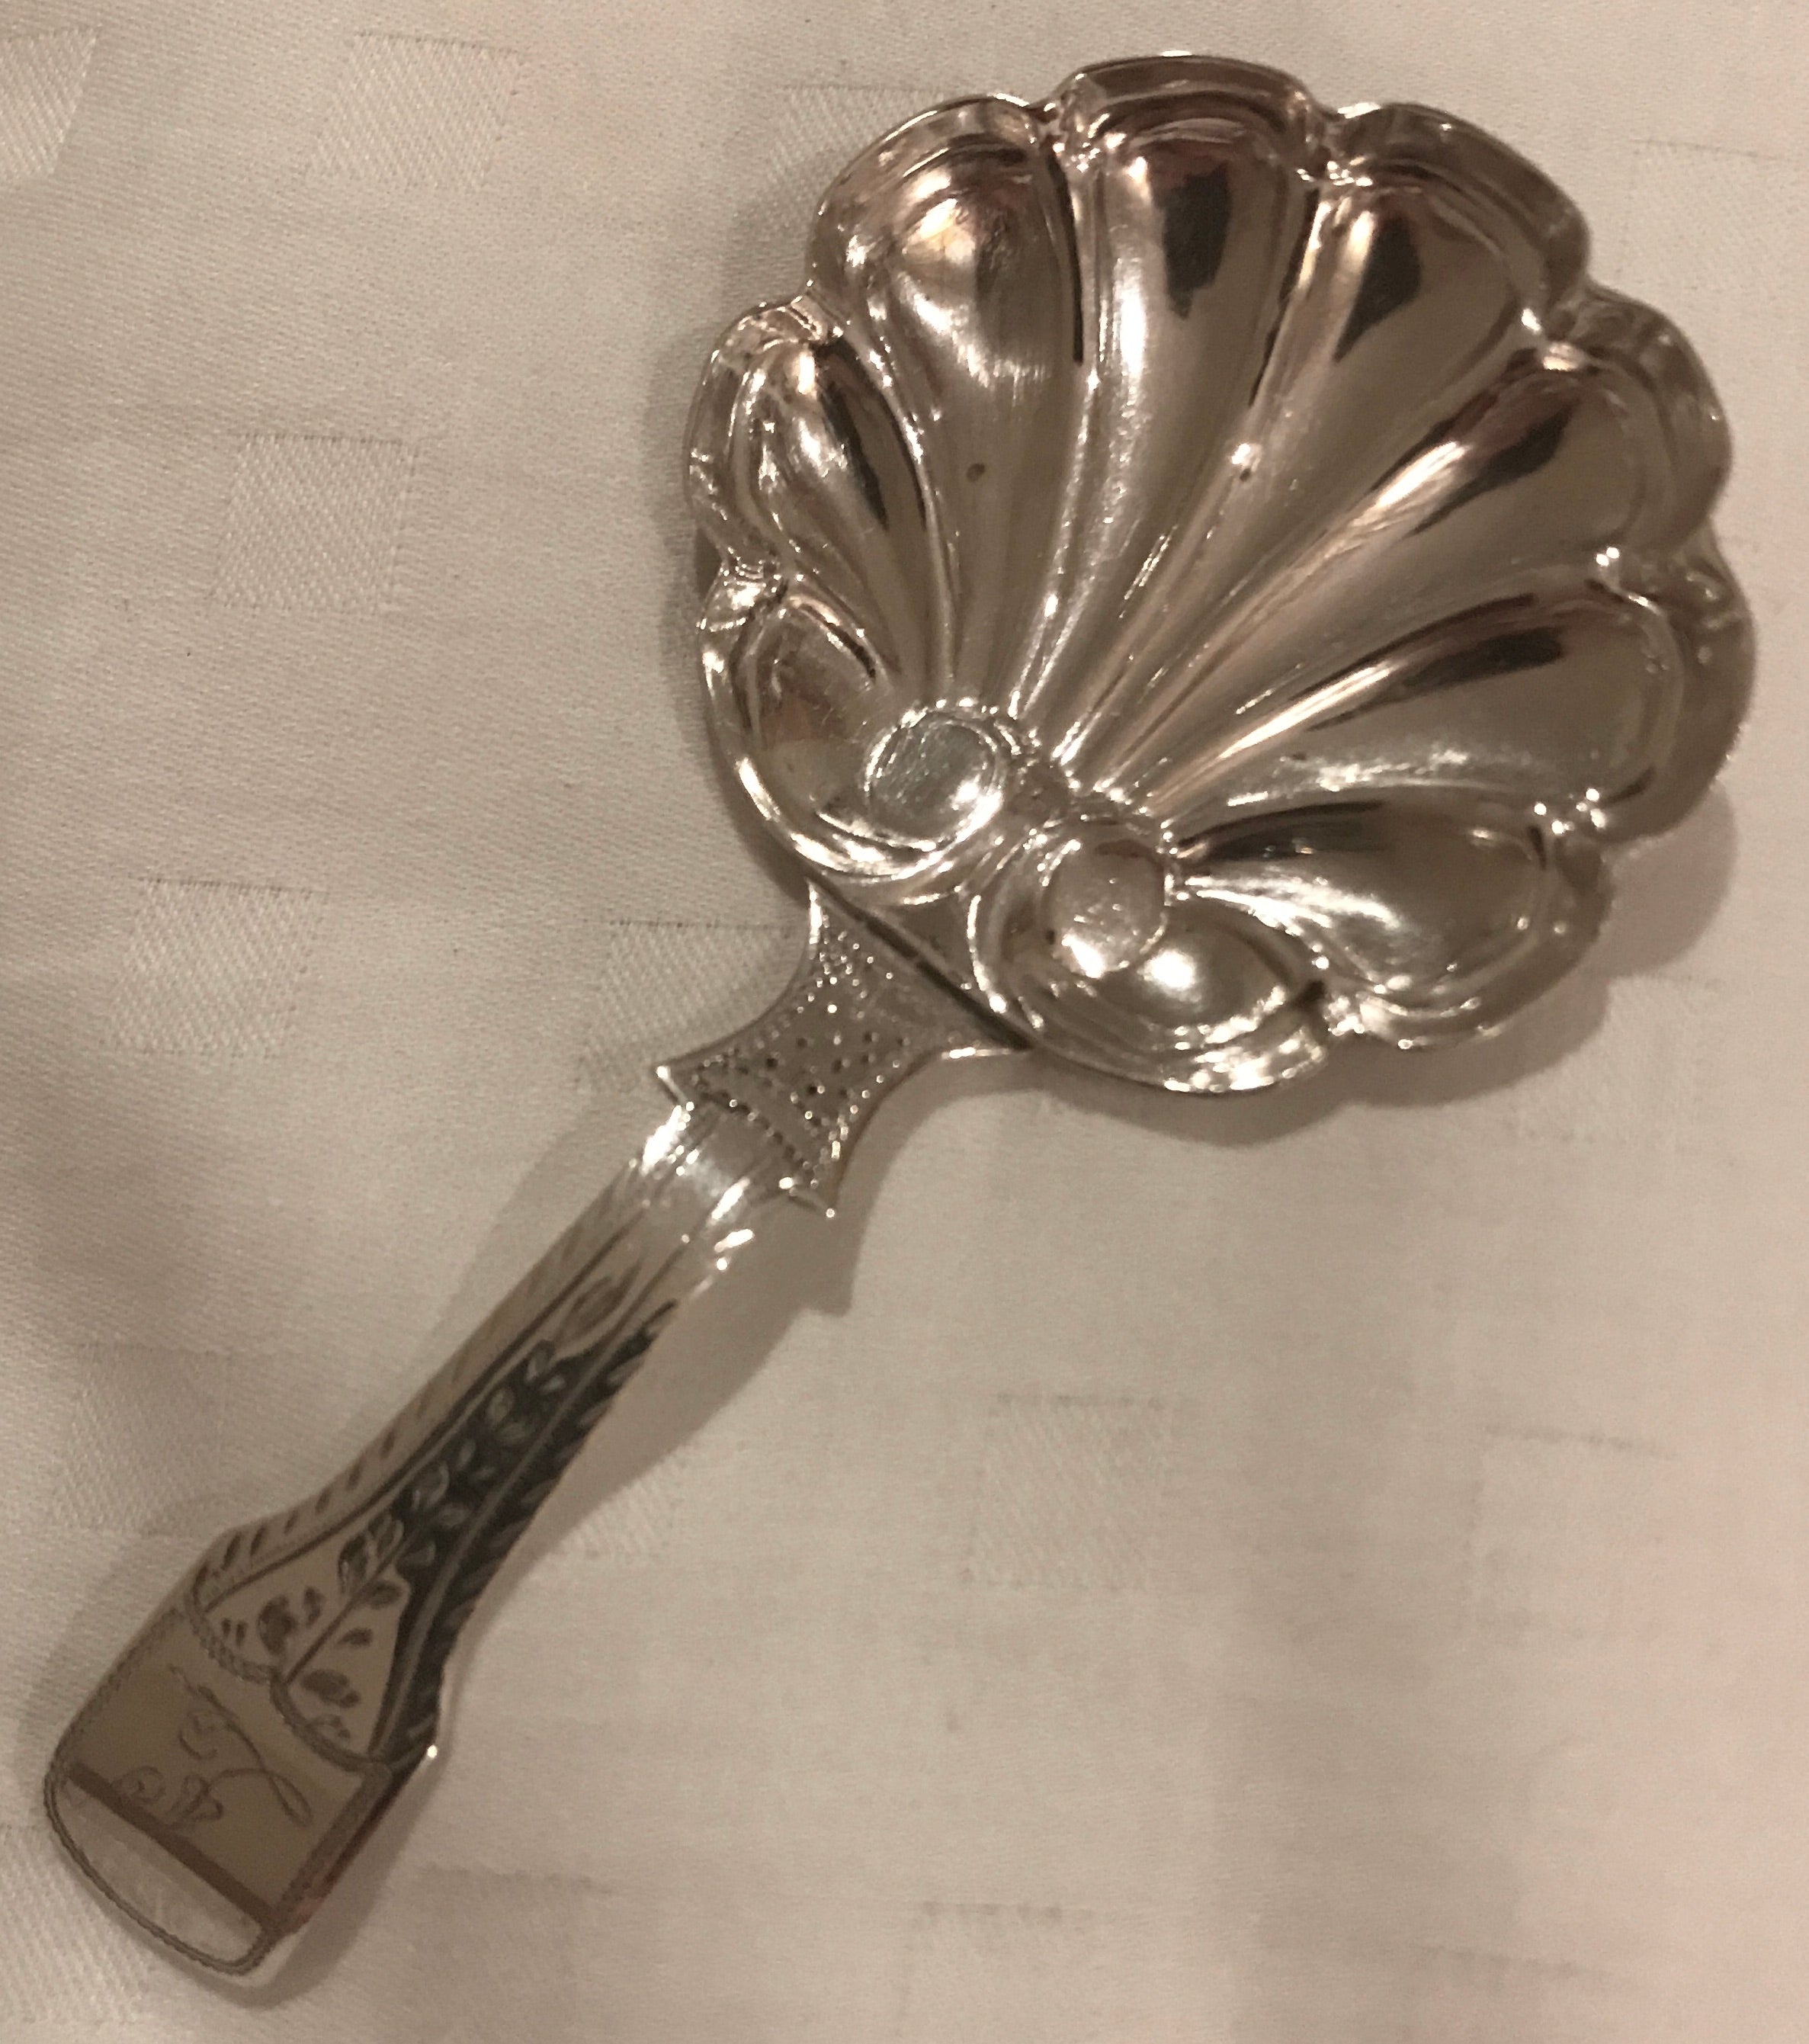 English George IV Sterling Silver Caddy Spoon by John Lawrence, 1823.